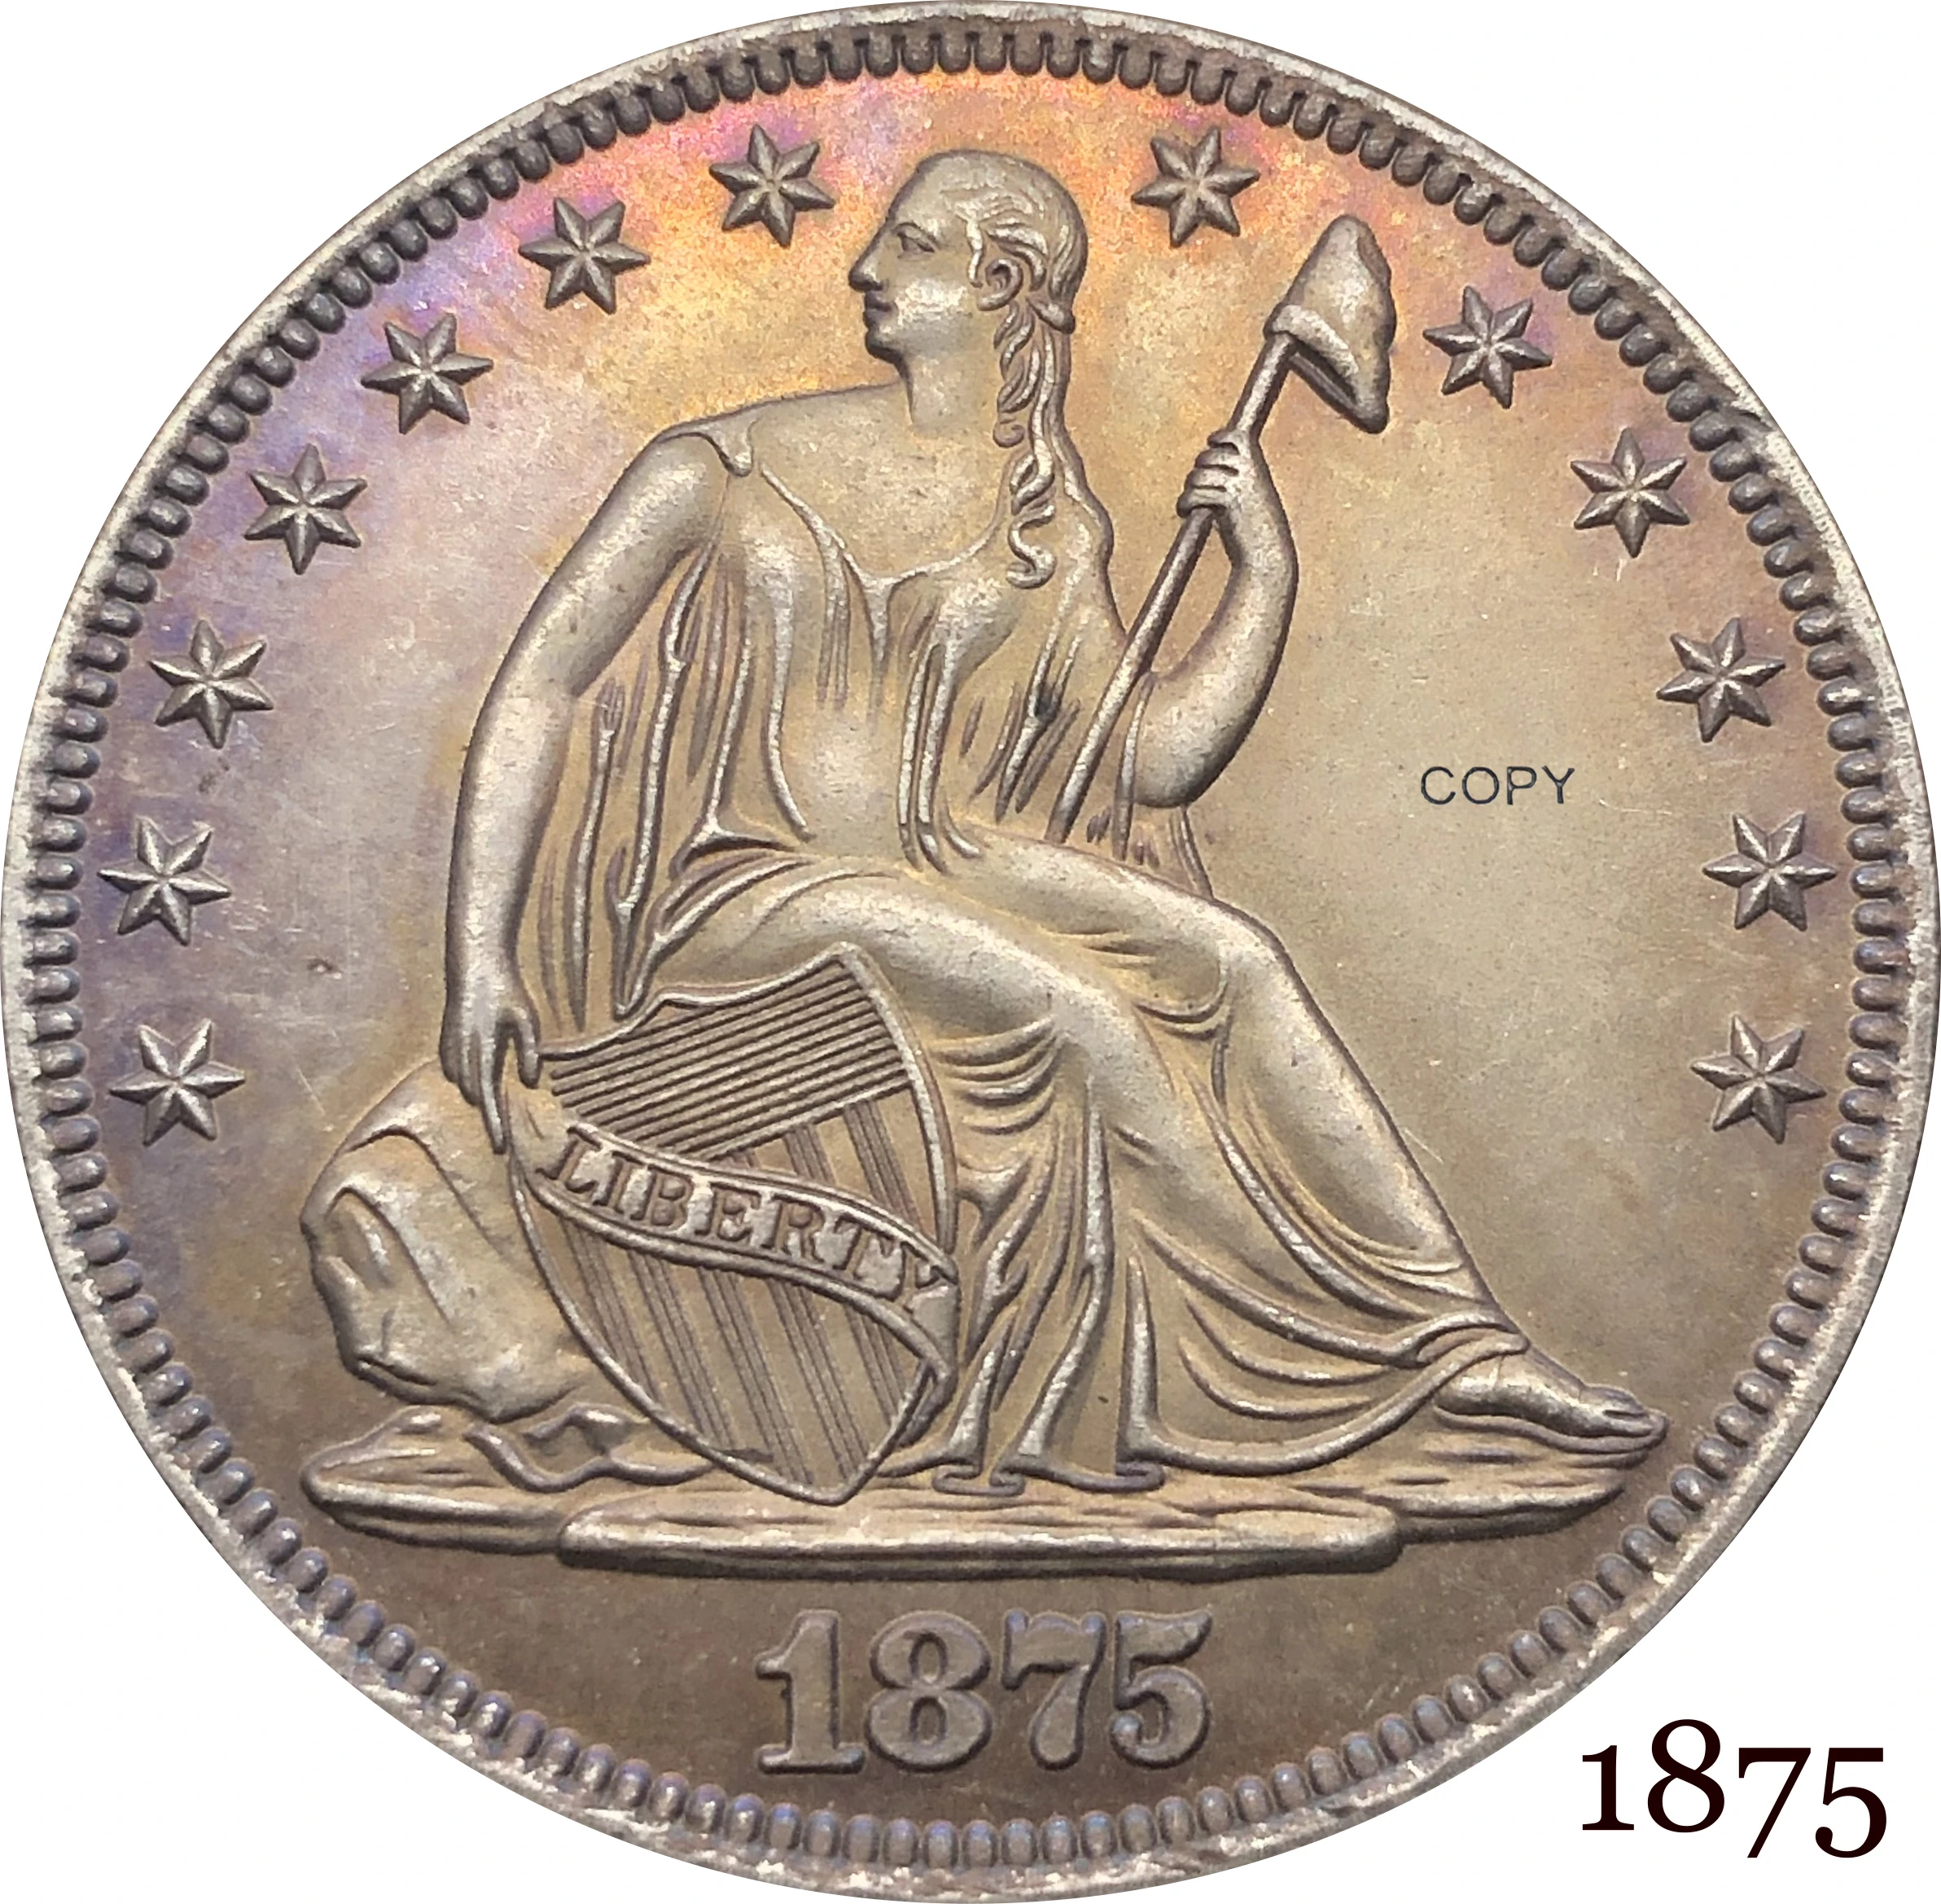 

United States America USA 1875 ½ Dollar Seated Liberty Half Dollar Cupronickel Silver Plated Below Eagle Copy Coin With Motto